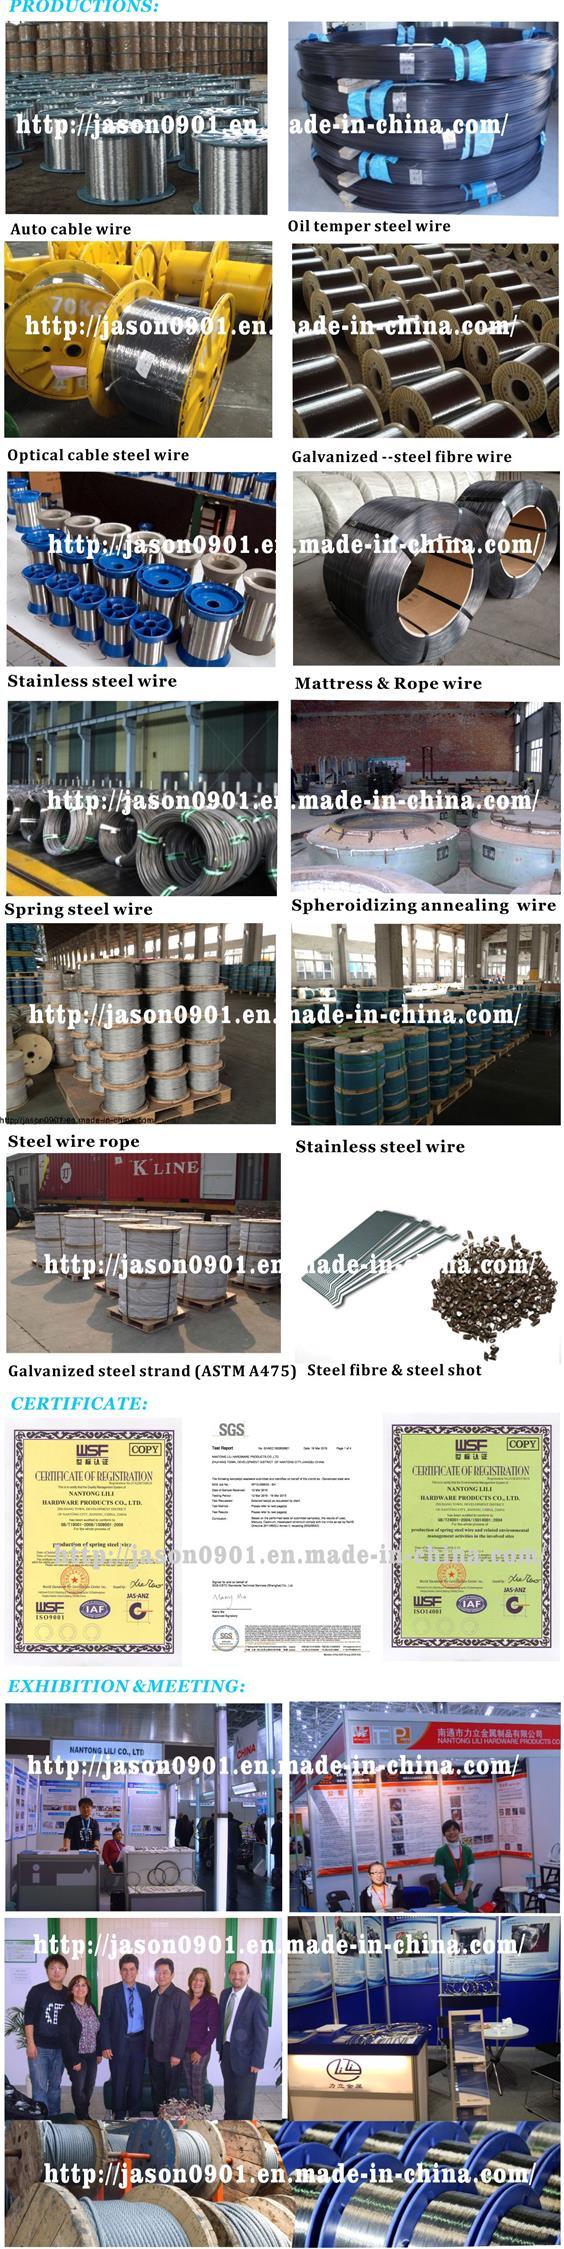 Steel Wire Rope for Fishery, Wire Rope, Stainless Steel Wire, Stainless Wire Rope